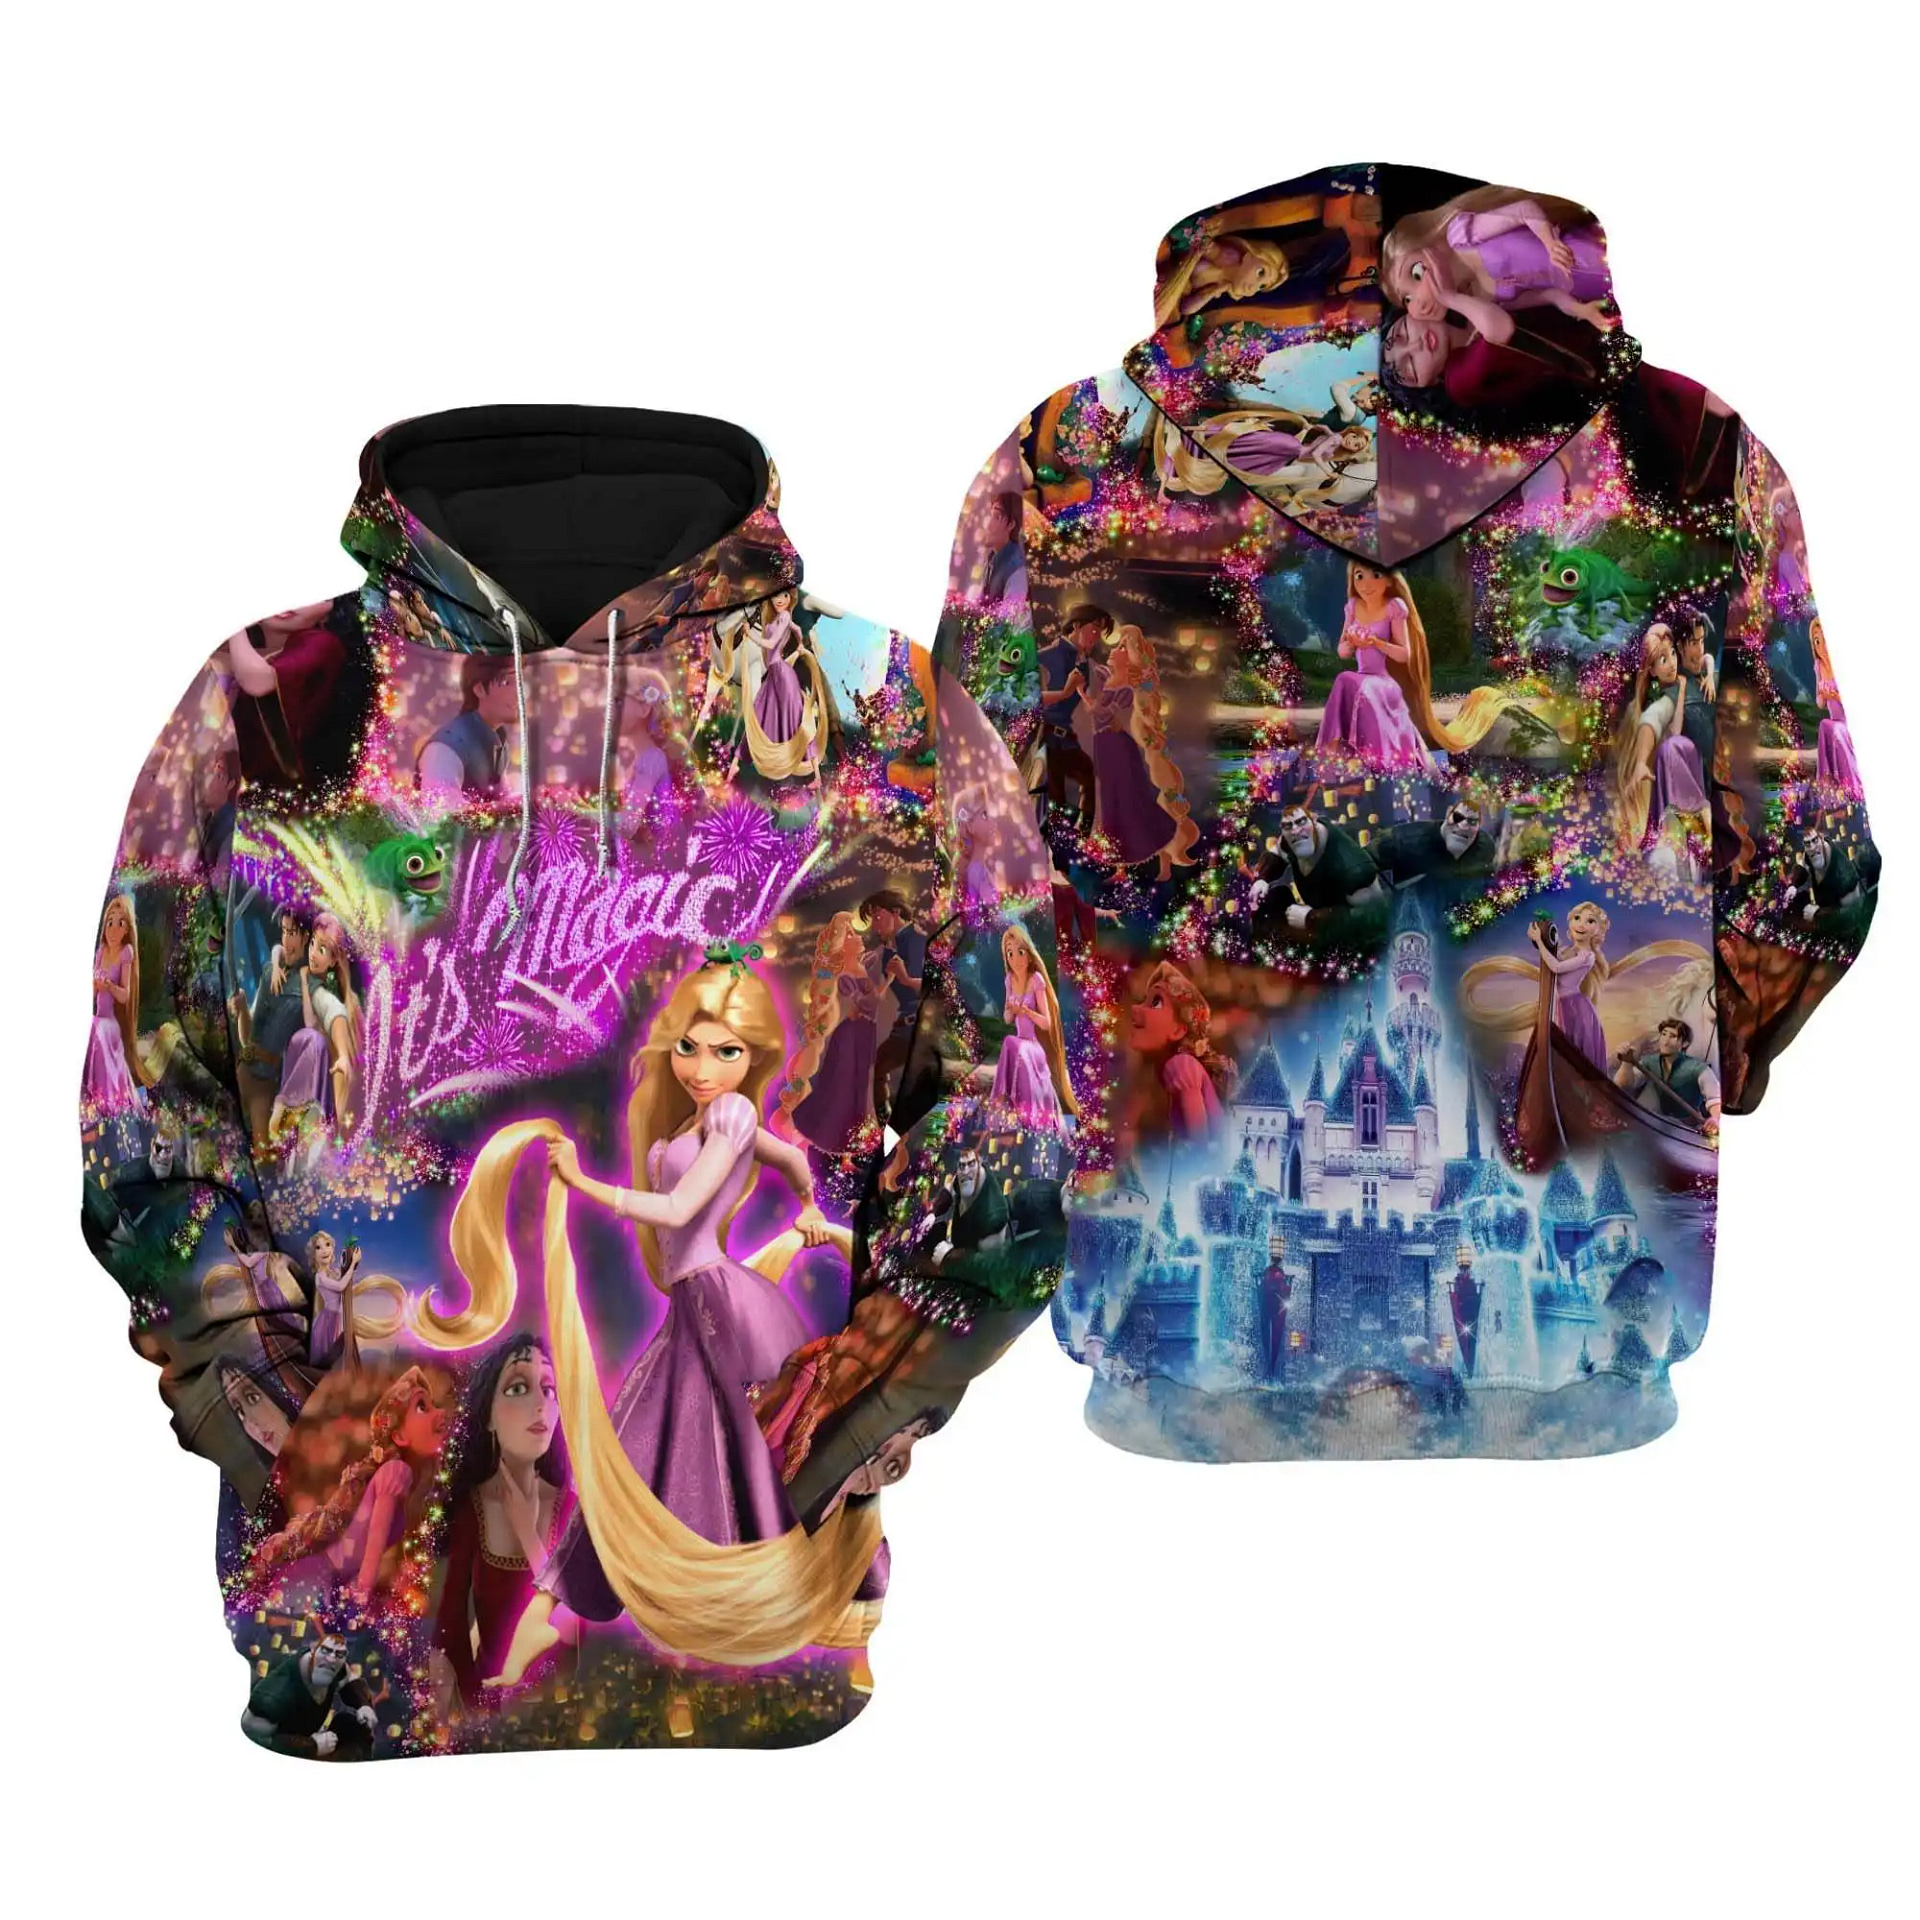 Rapunzel Tangled Castle Disney Cartoon Graphic Outfits Clothing Men Women Kids Toddlers Hoodie 3D